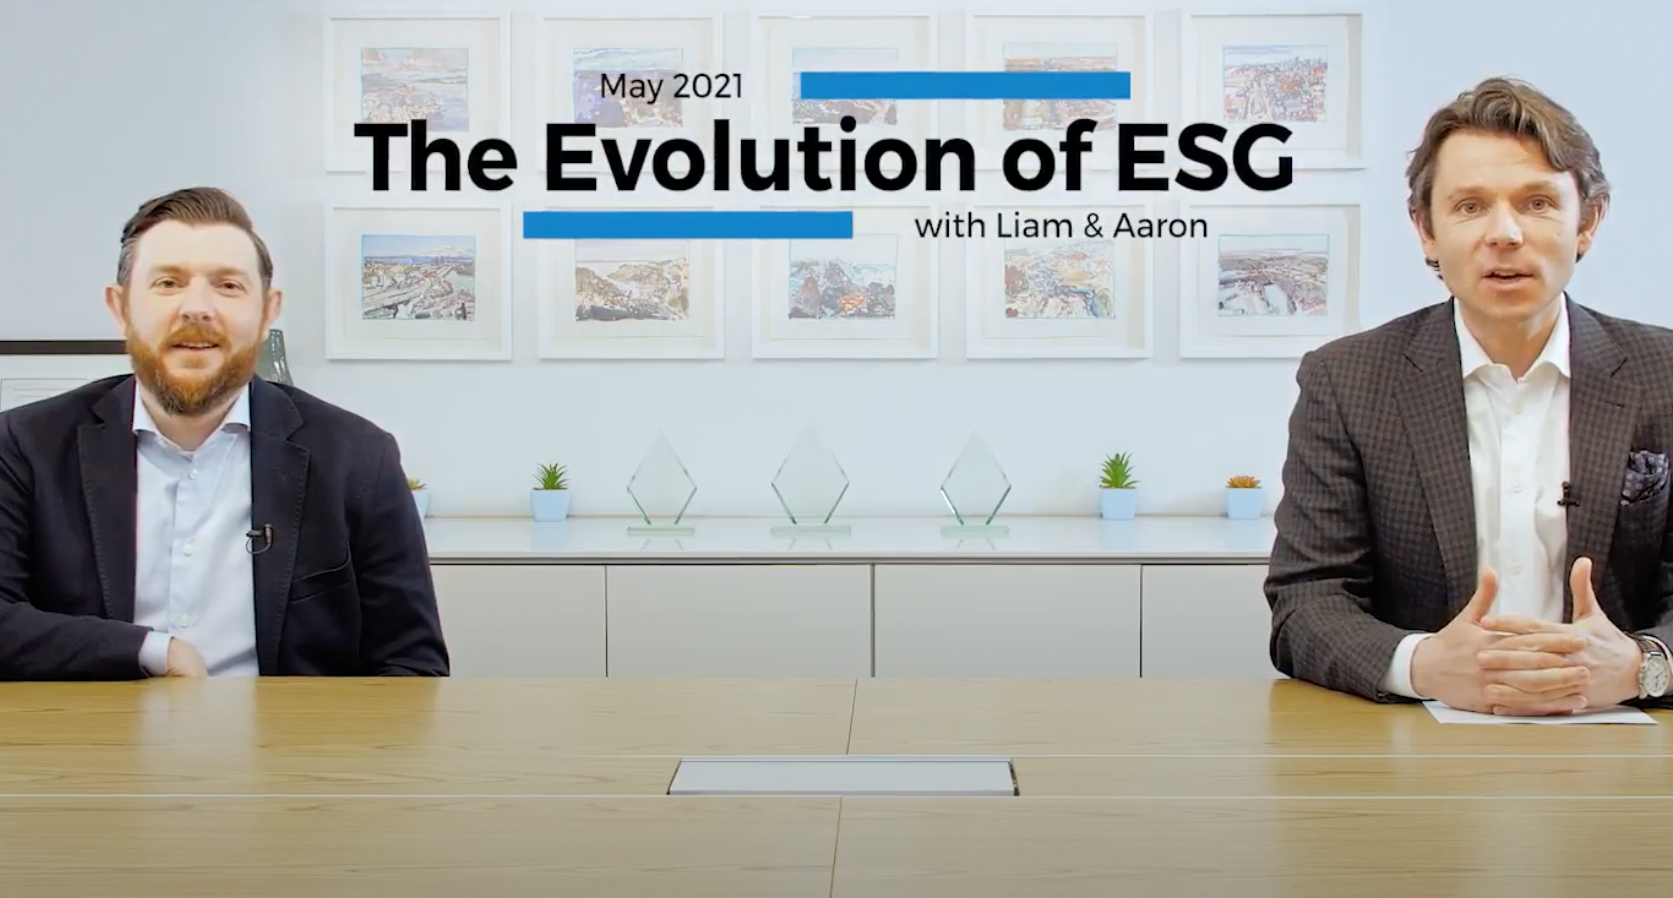 The Evolution of ESG video with two men sitting in boardroom